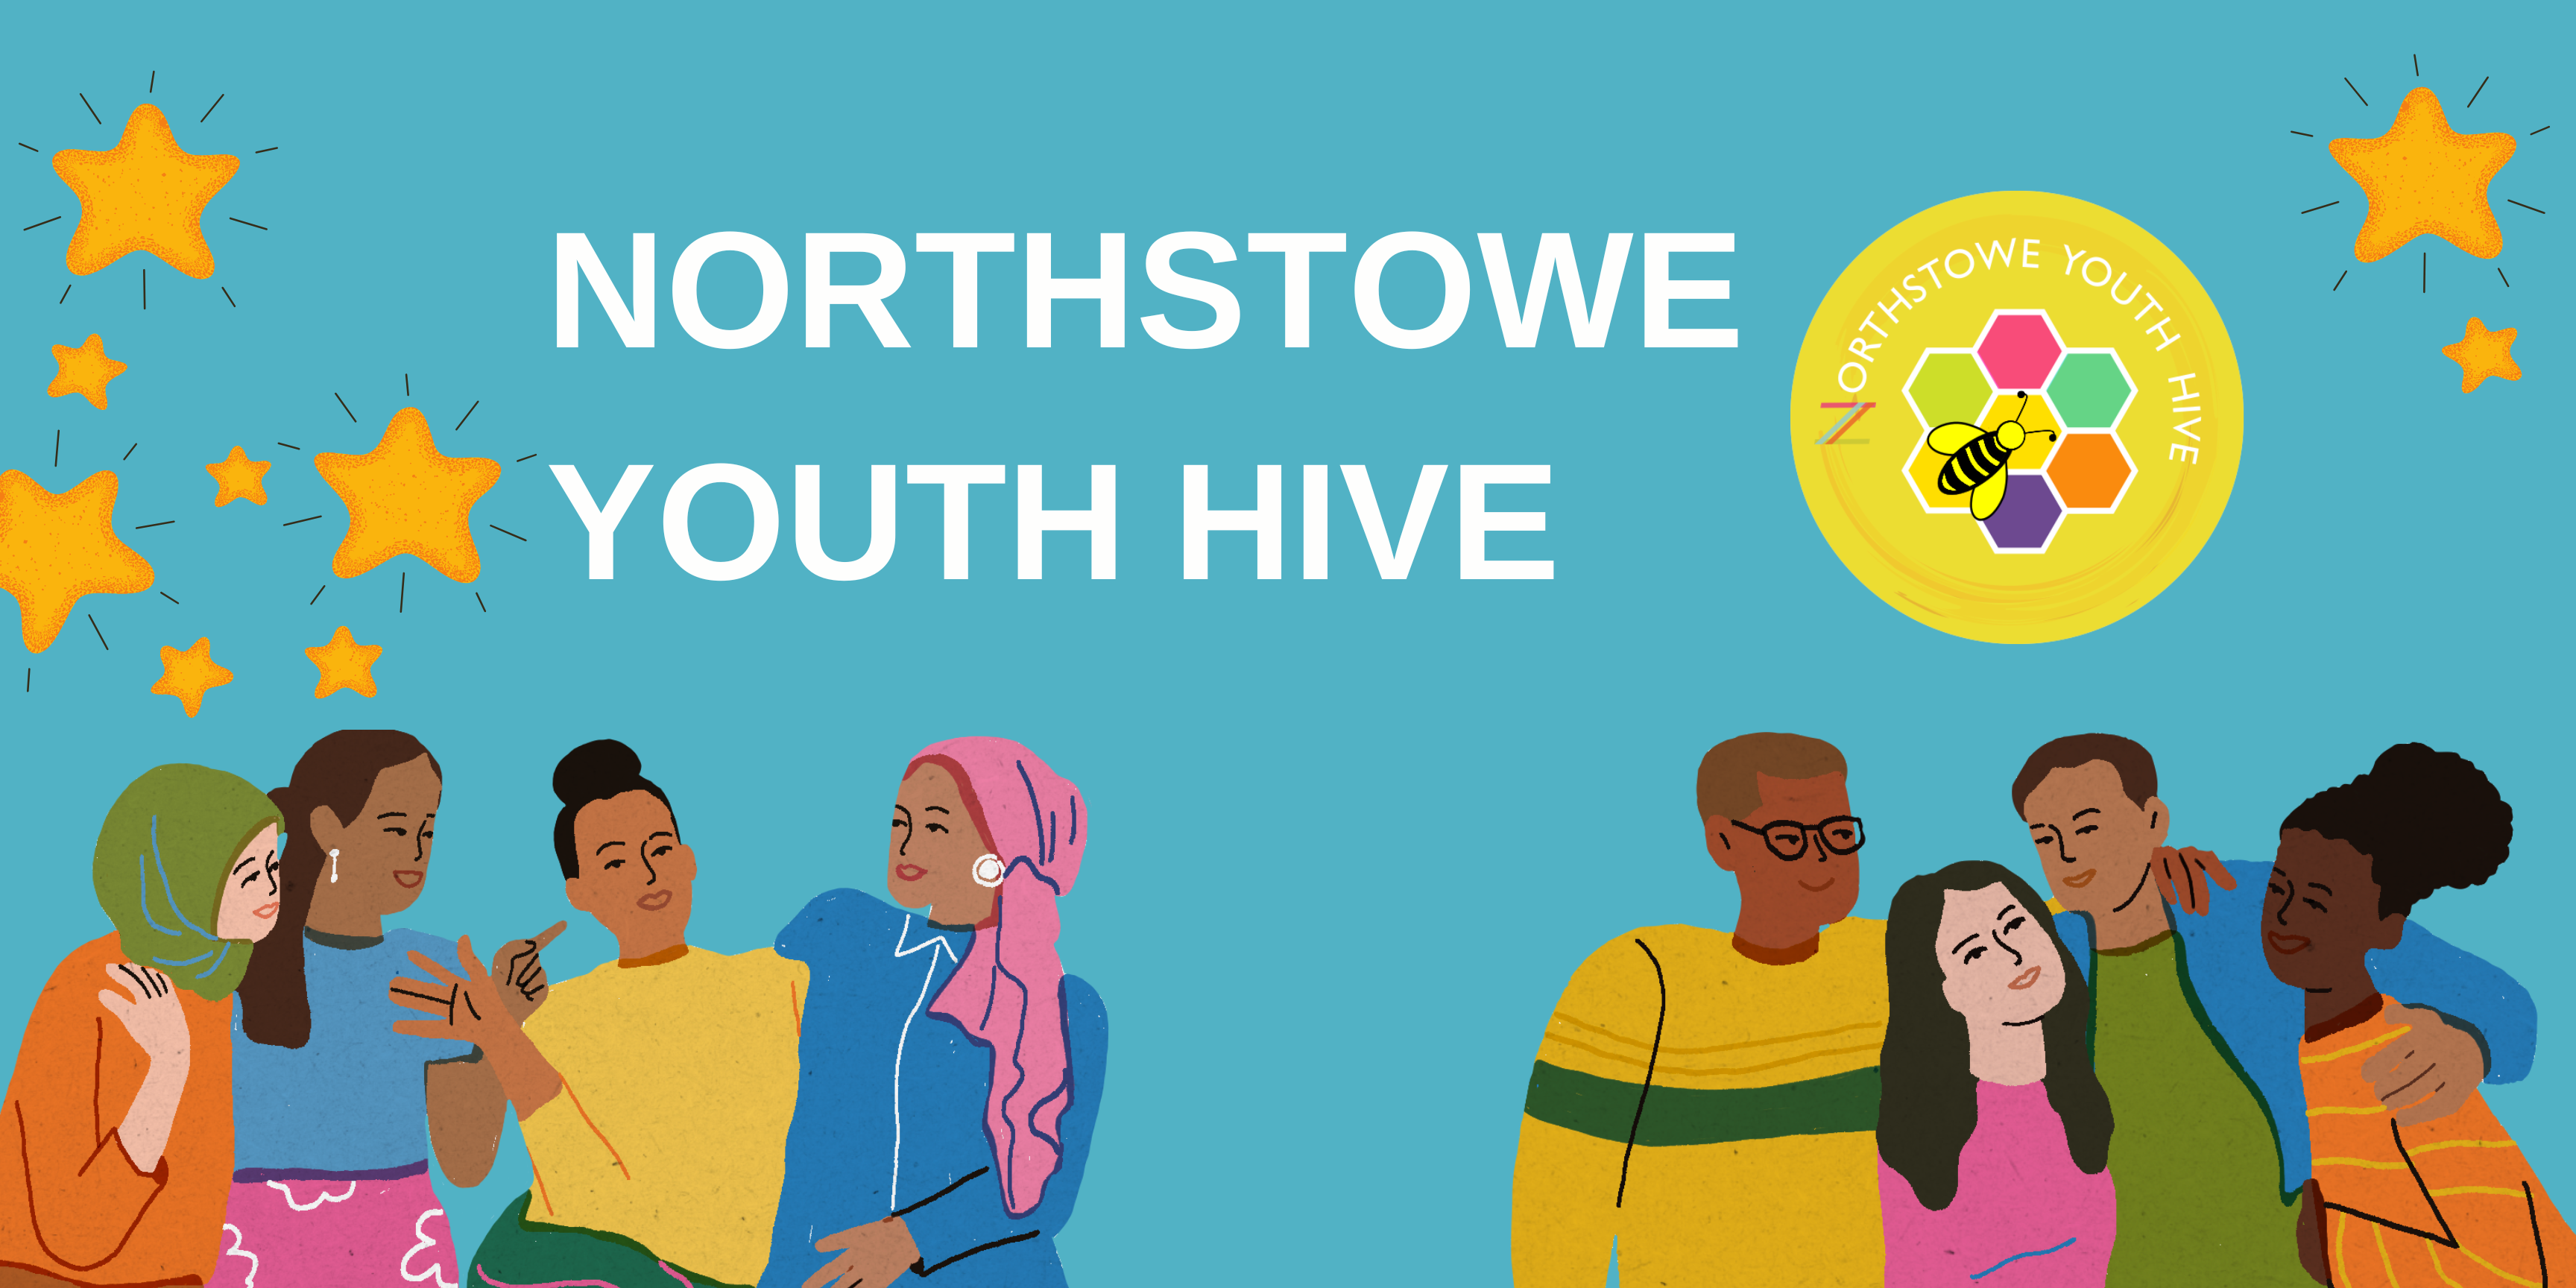 Youthwork in Northstowe: needs-led; asset-based; working in partnership